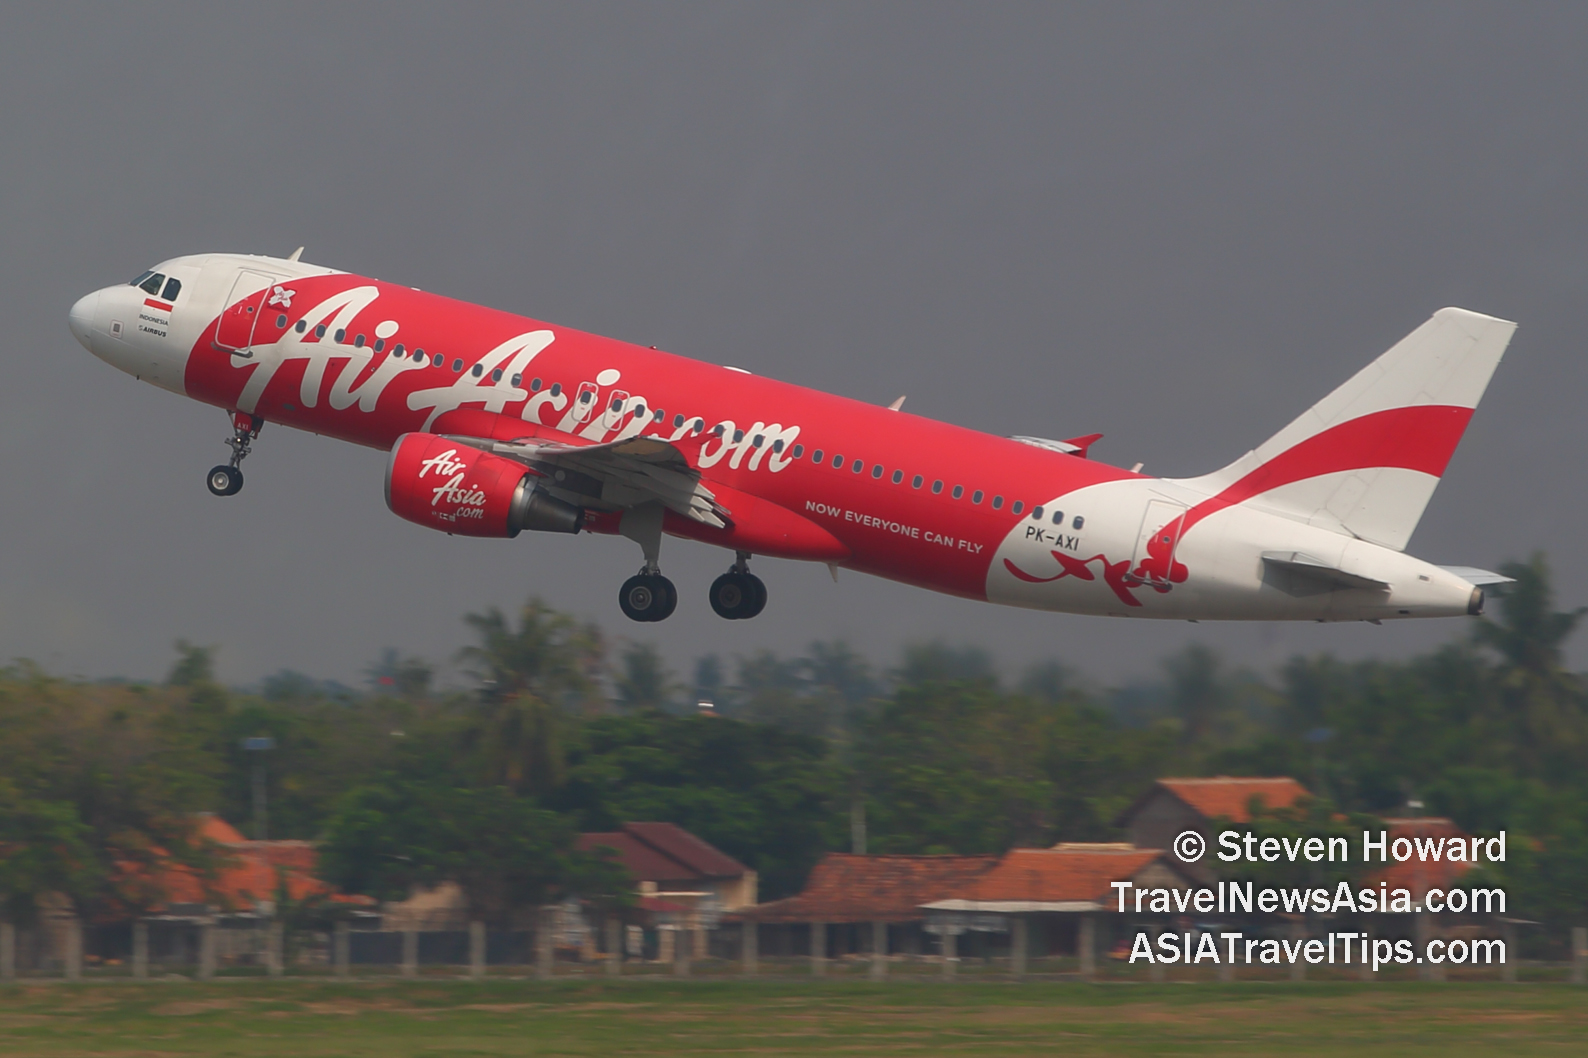 AirAsia Indonesia Airbus A320 reg: PK-AXI. Picture by Steven Howard of TravelNewsAsia.com Click to enlarge.